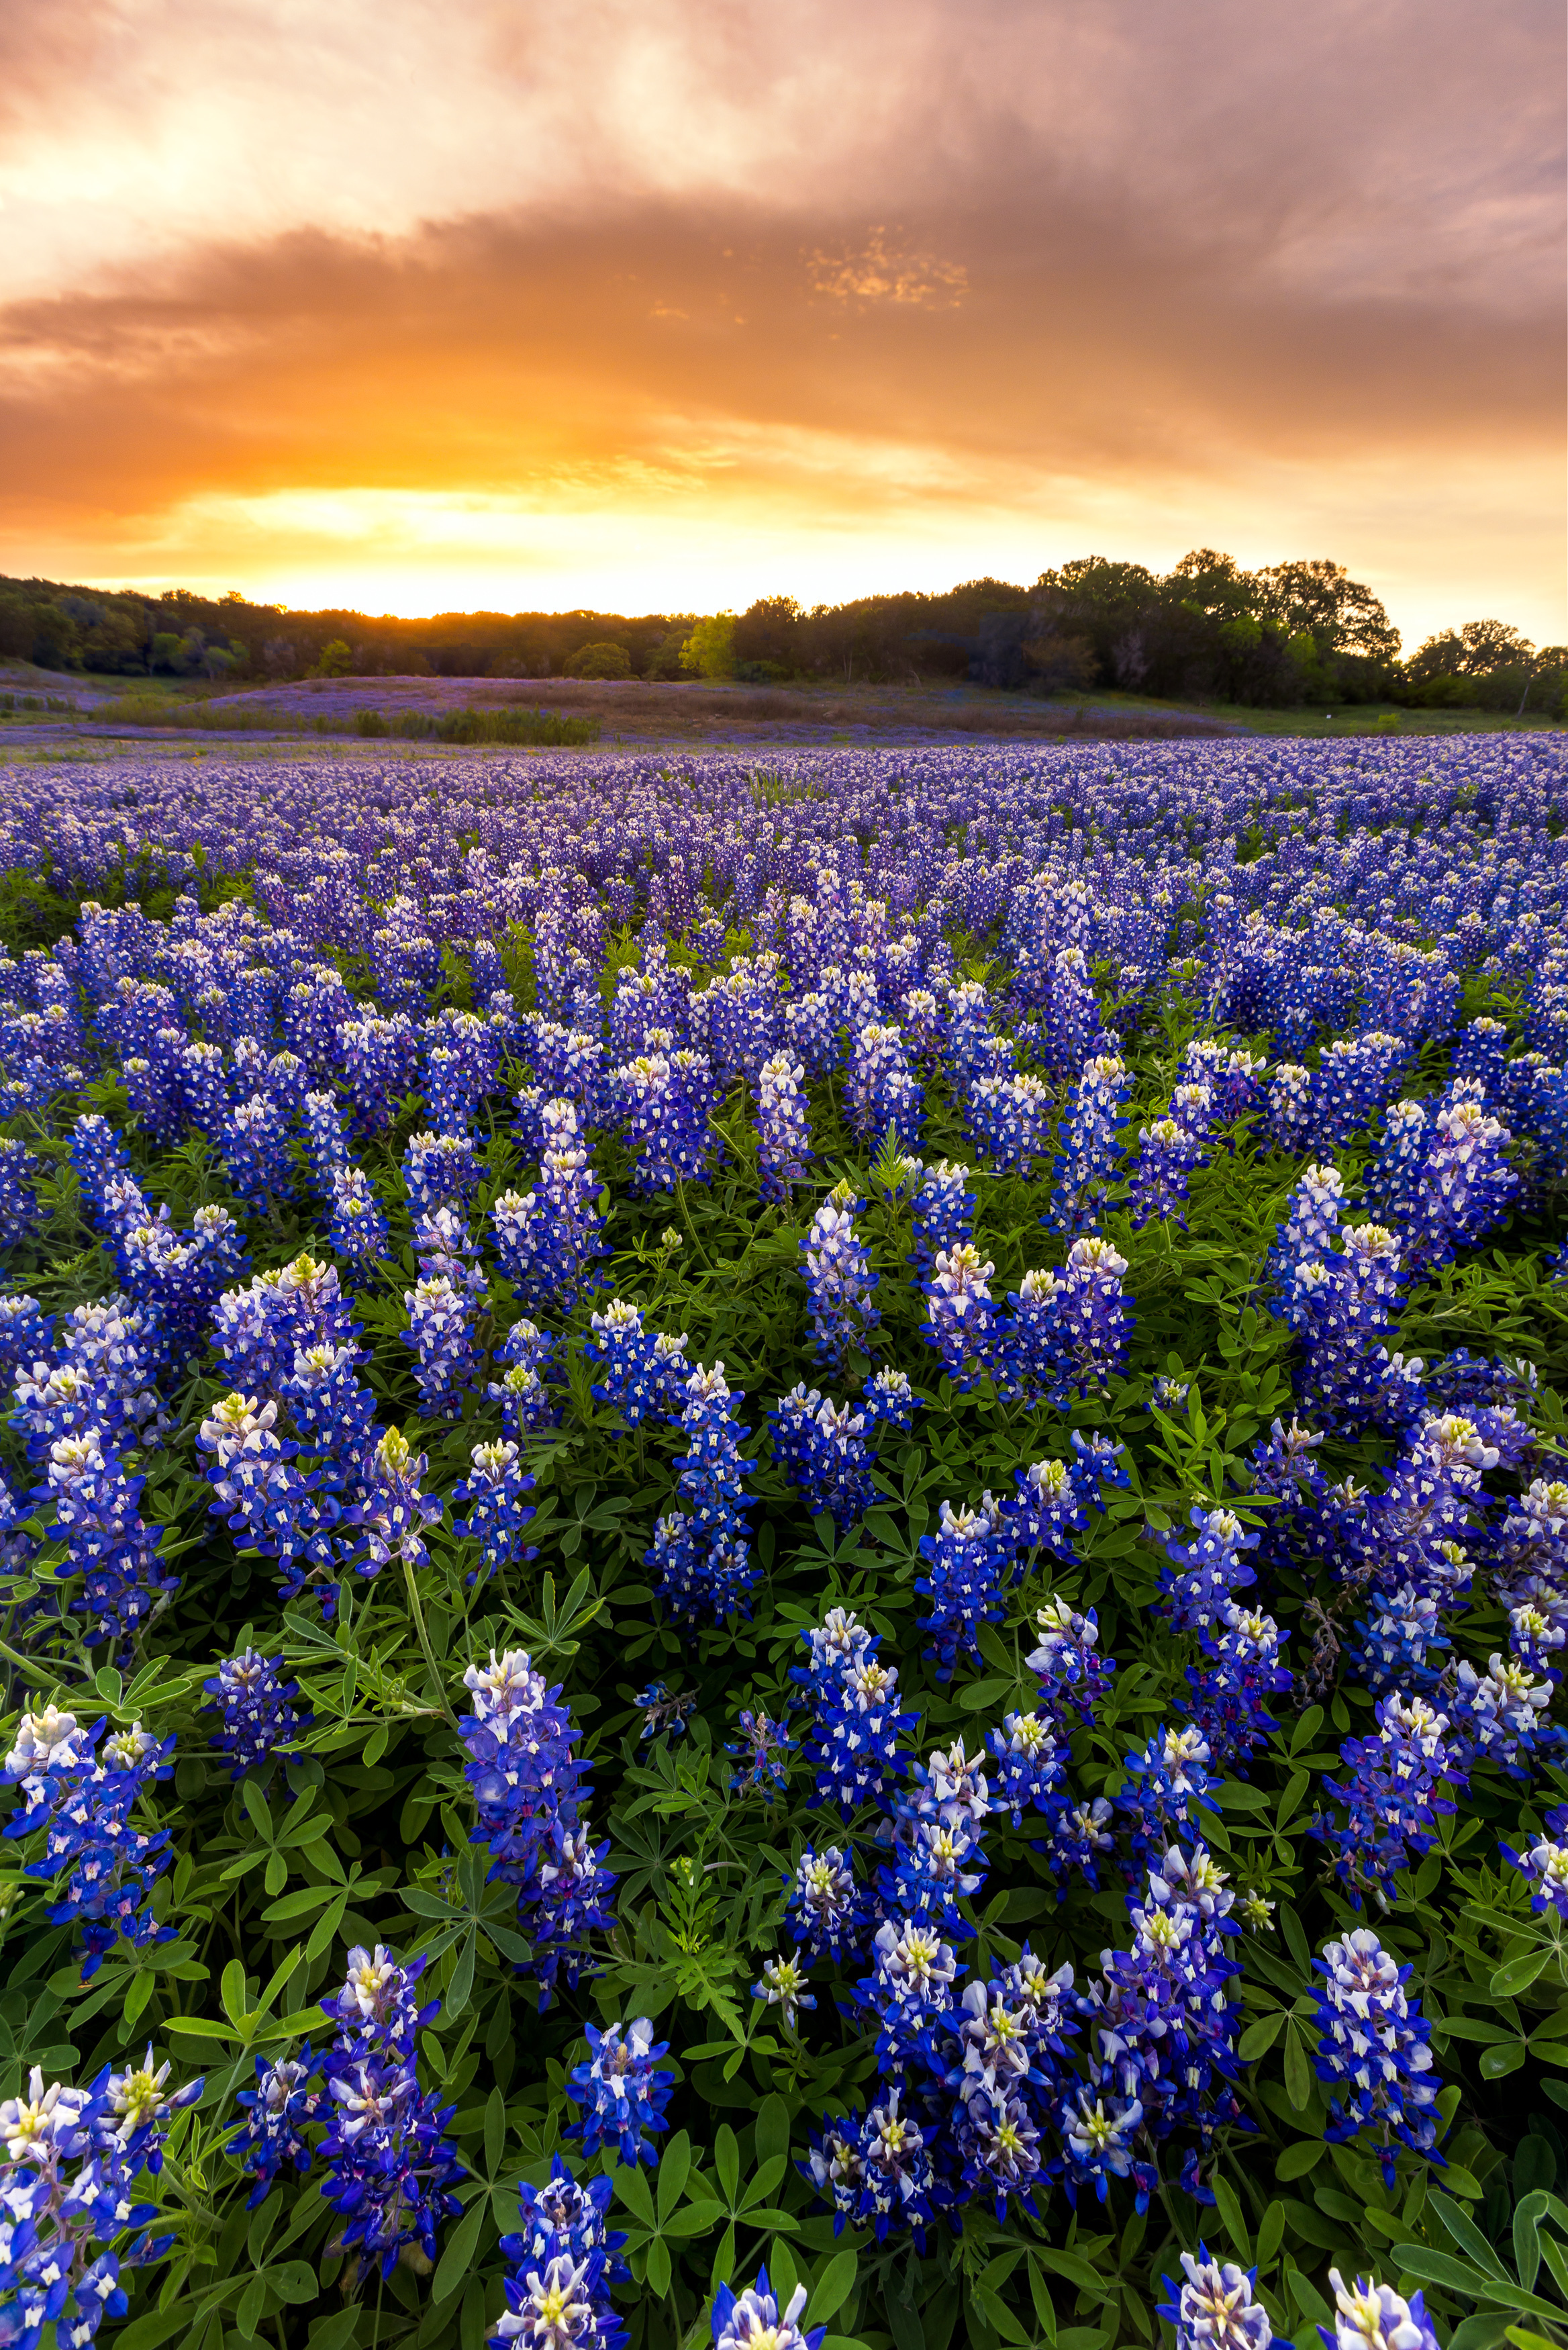 Bluebonnets in the Texas Hill Country